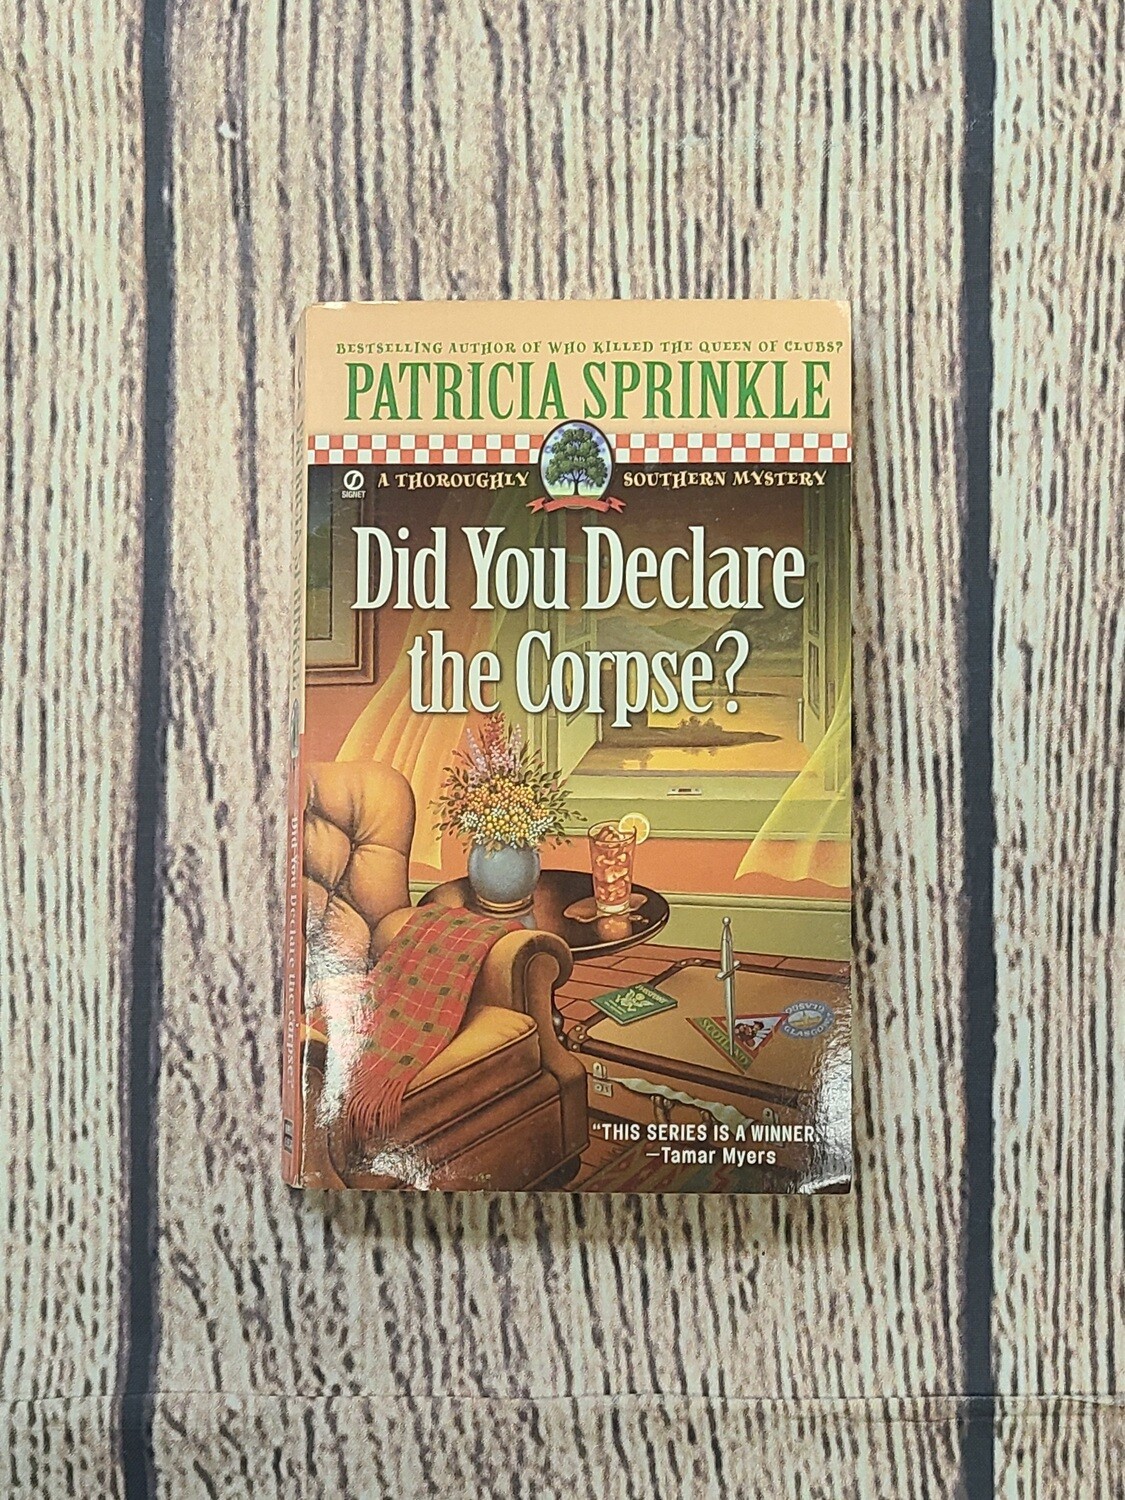 Did You Declare the Corpse? by Patricia Sprinkle